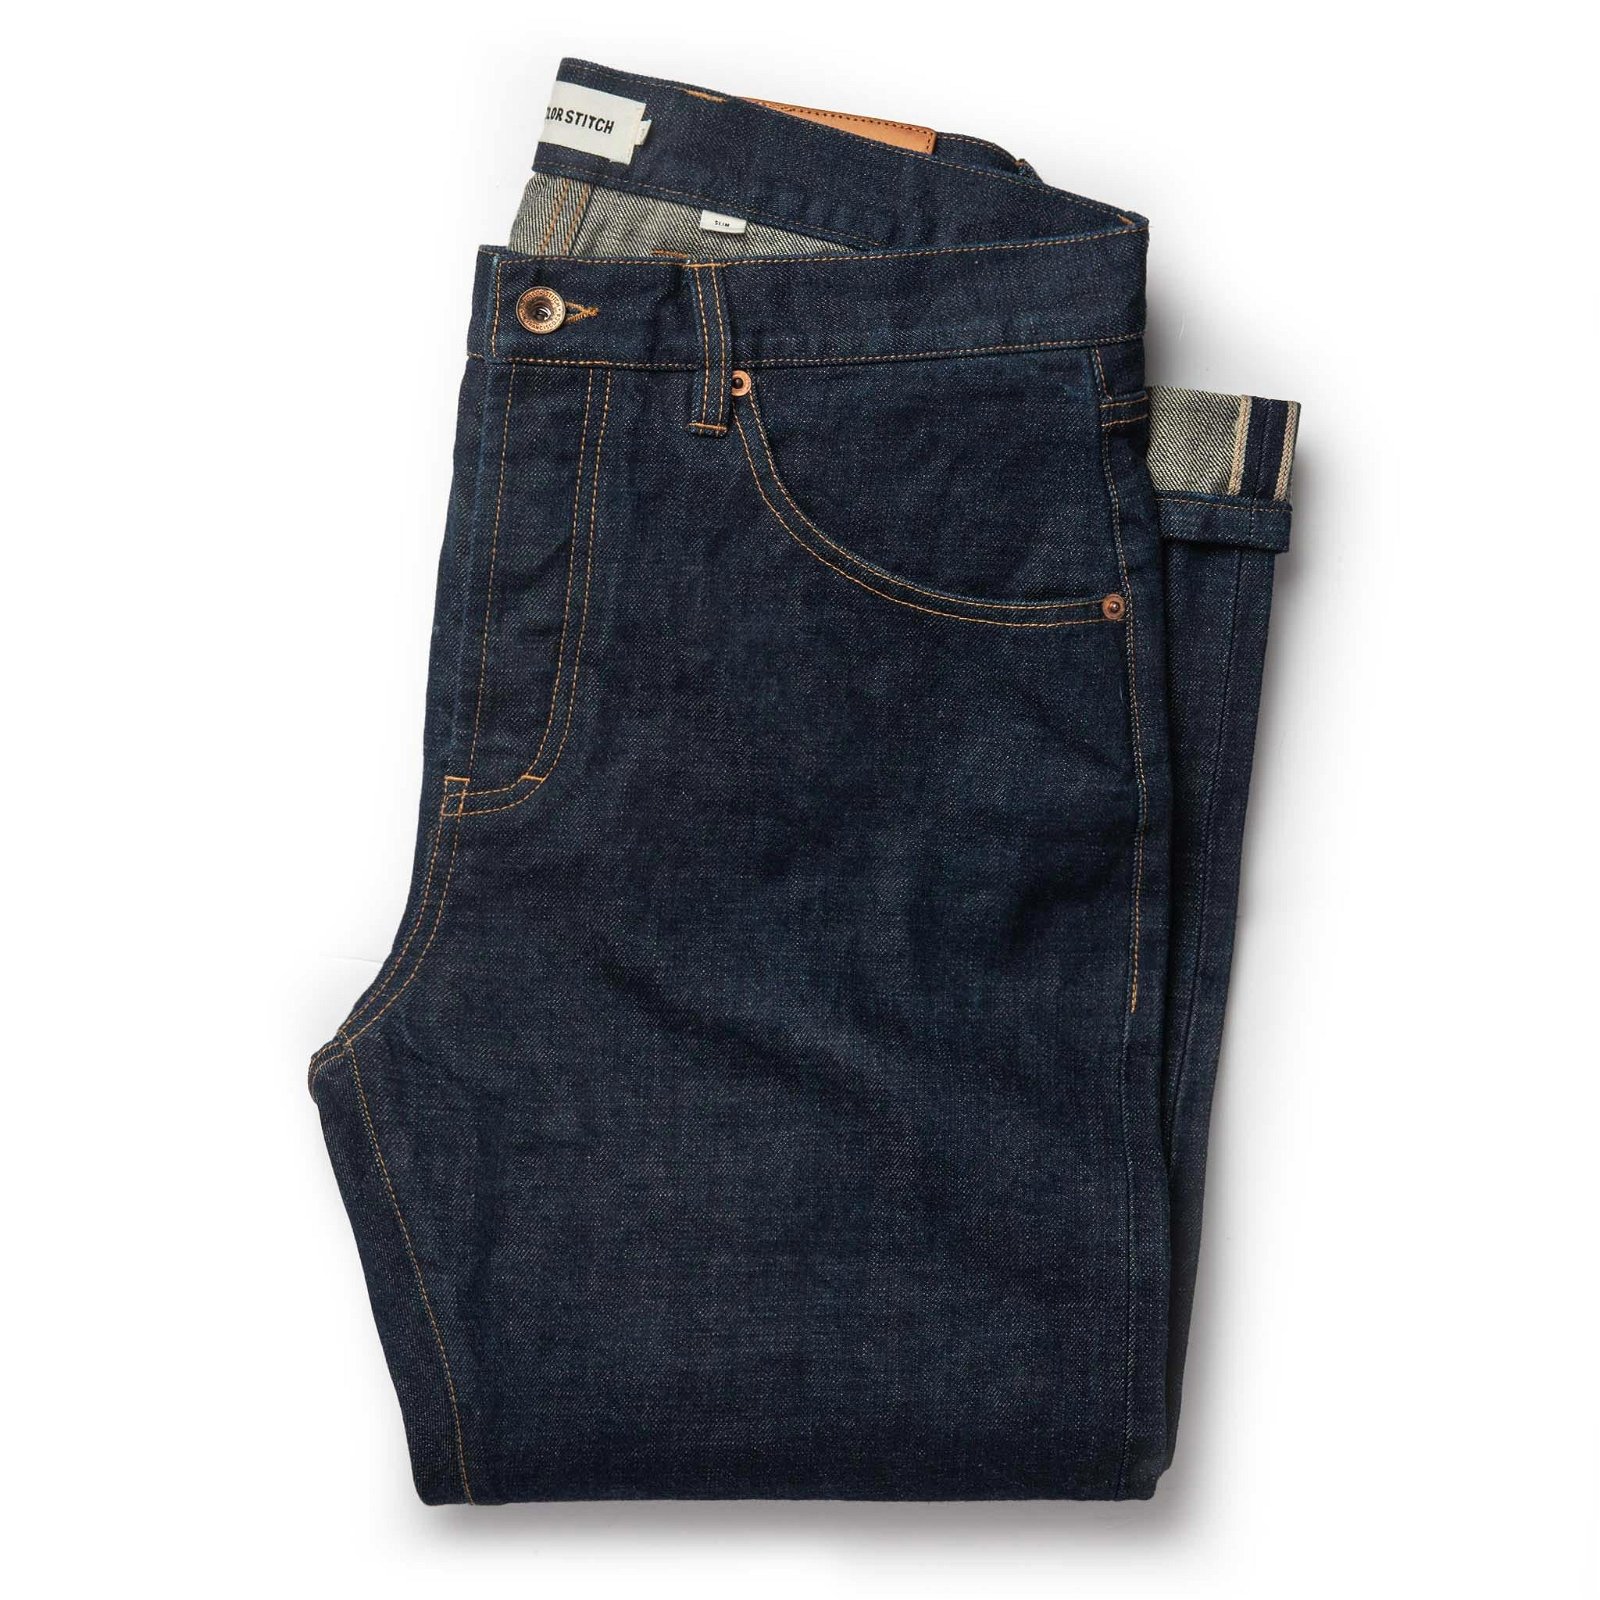 Image of The Slim Jean in Rinsed Organic Selvage